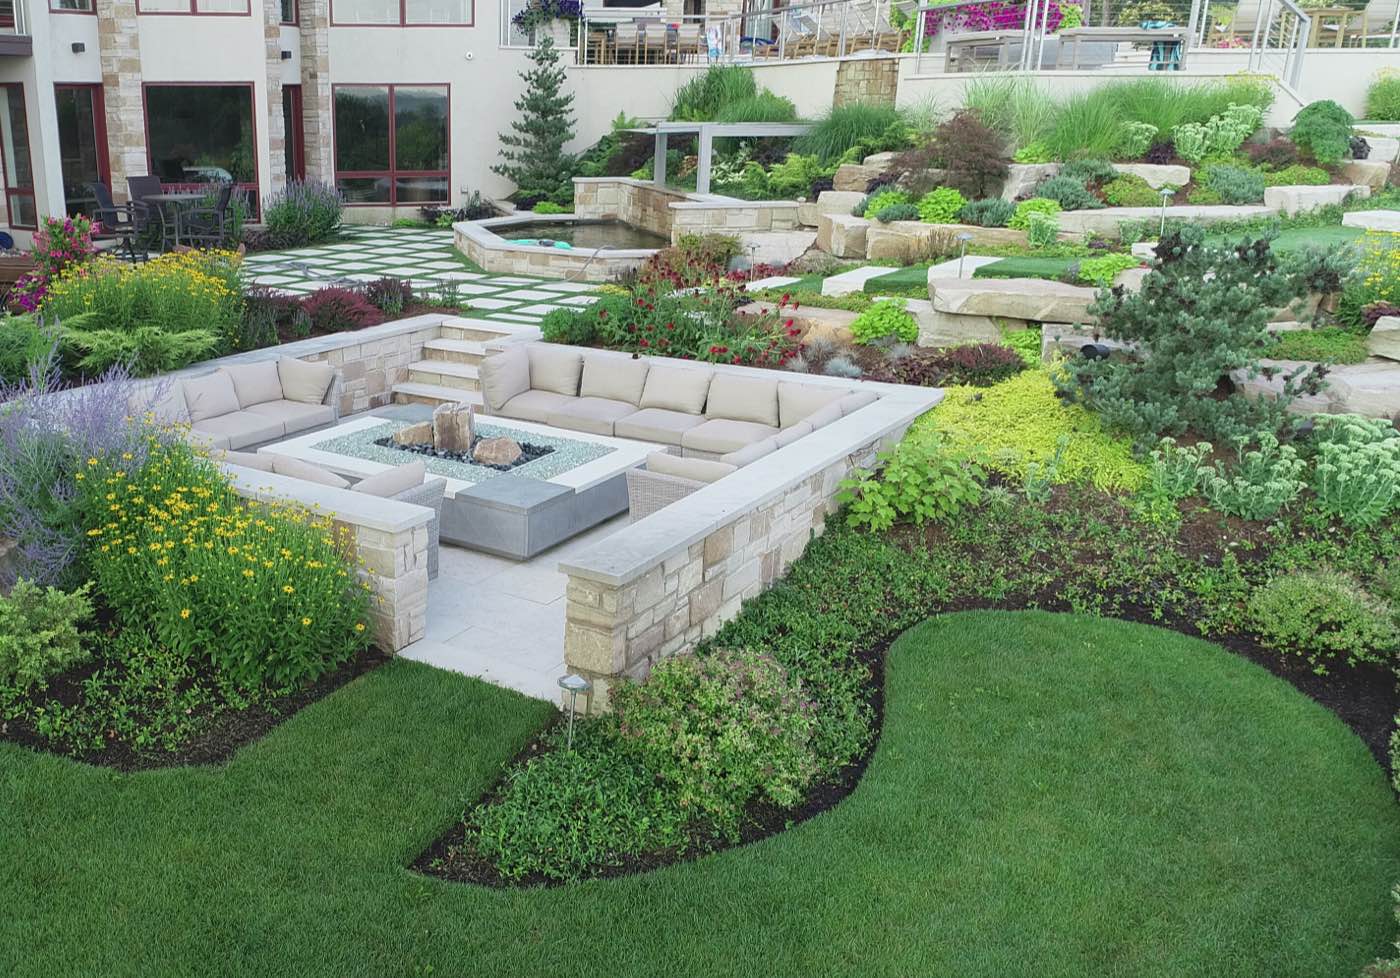 Outdoor seating area with fountain and raised plantings in background